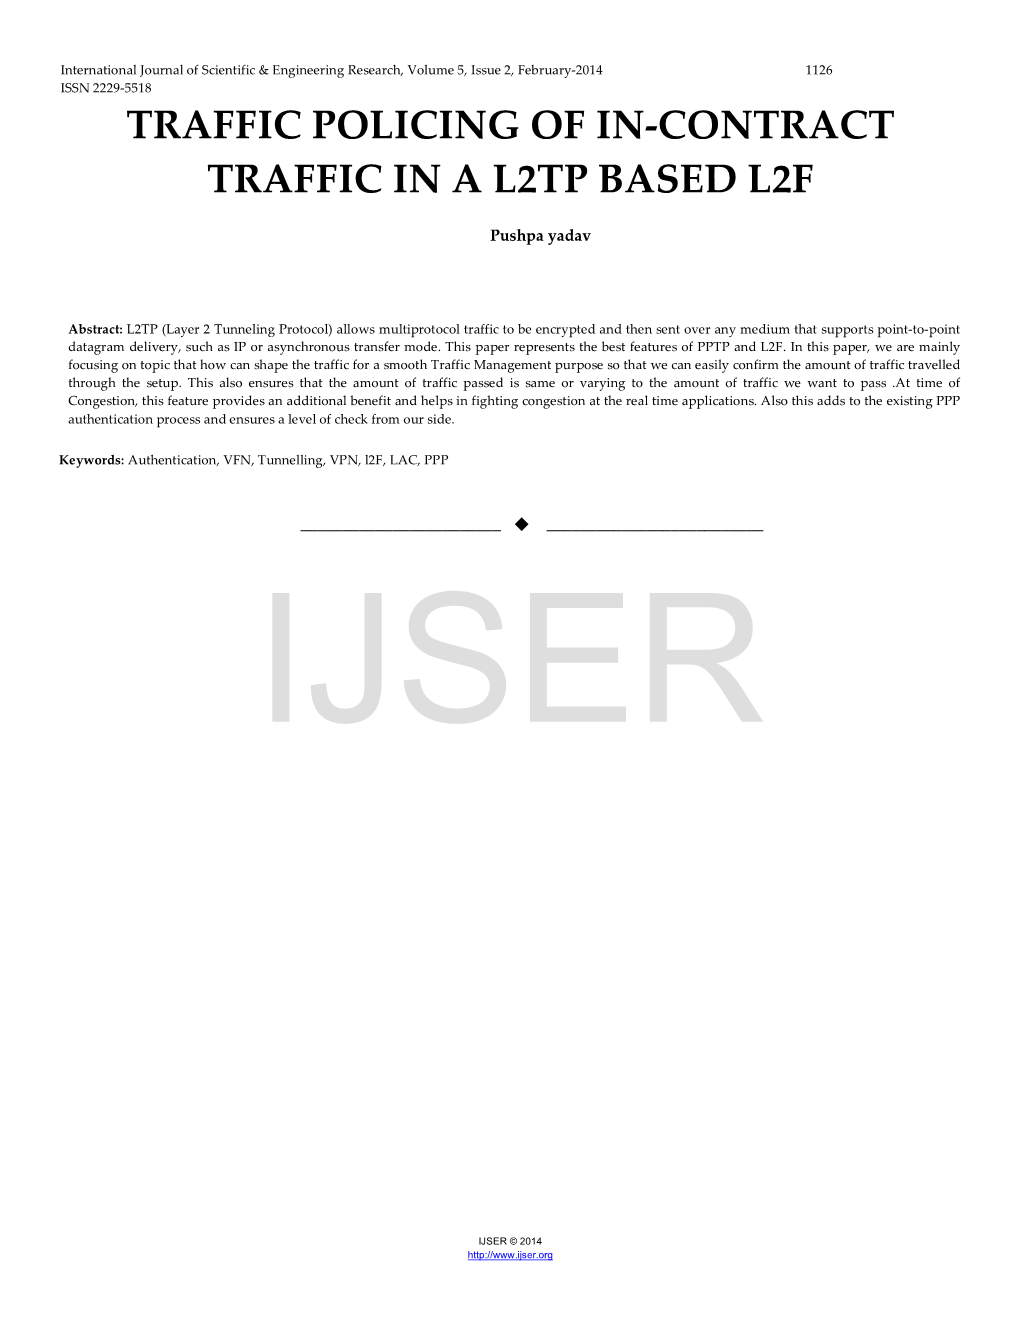 Traffic Policing of In-Contract Traffic in a L2tp Based L2f